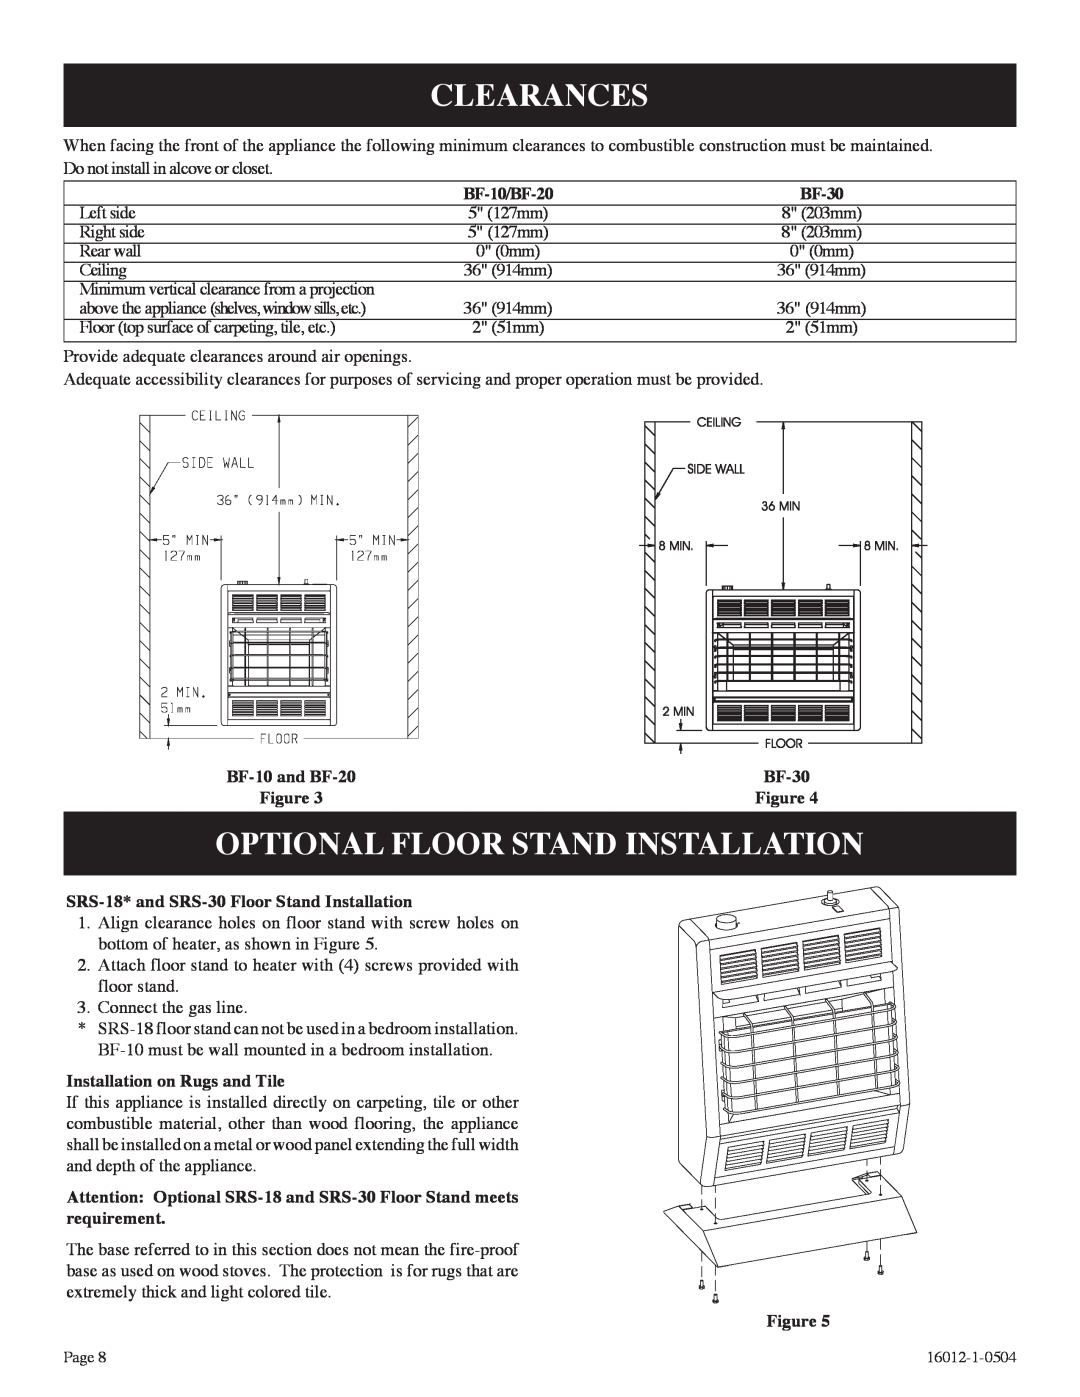 Empire Products BF-10-2, BF-20-2, BF-30-2 installation instructions Clearances, Optional Floor Stand Installation 